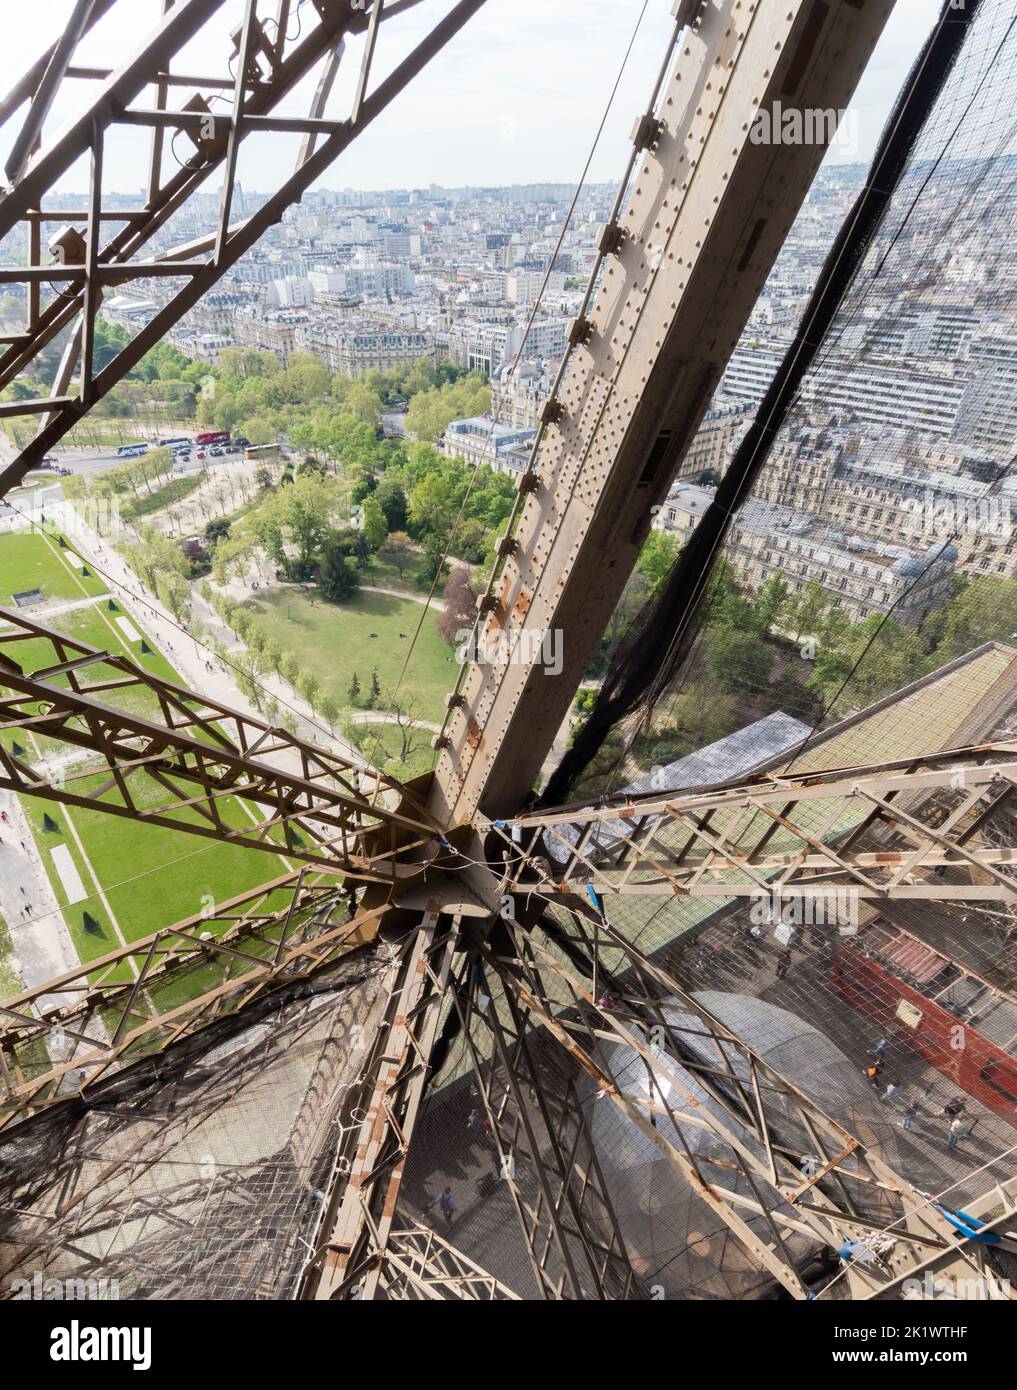 Steel frame detail of the Eiffel tower in Paris, France Stock Photo